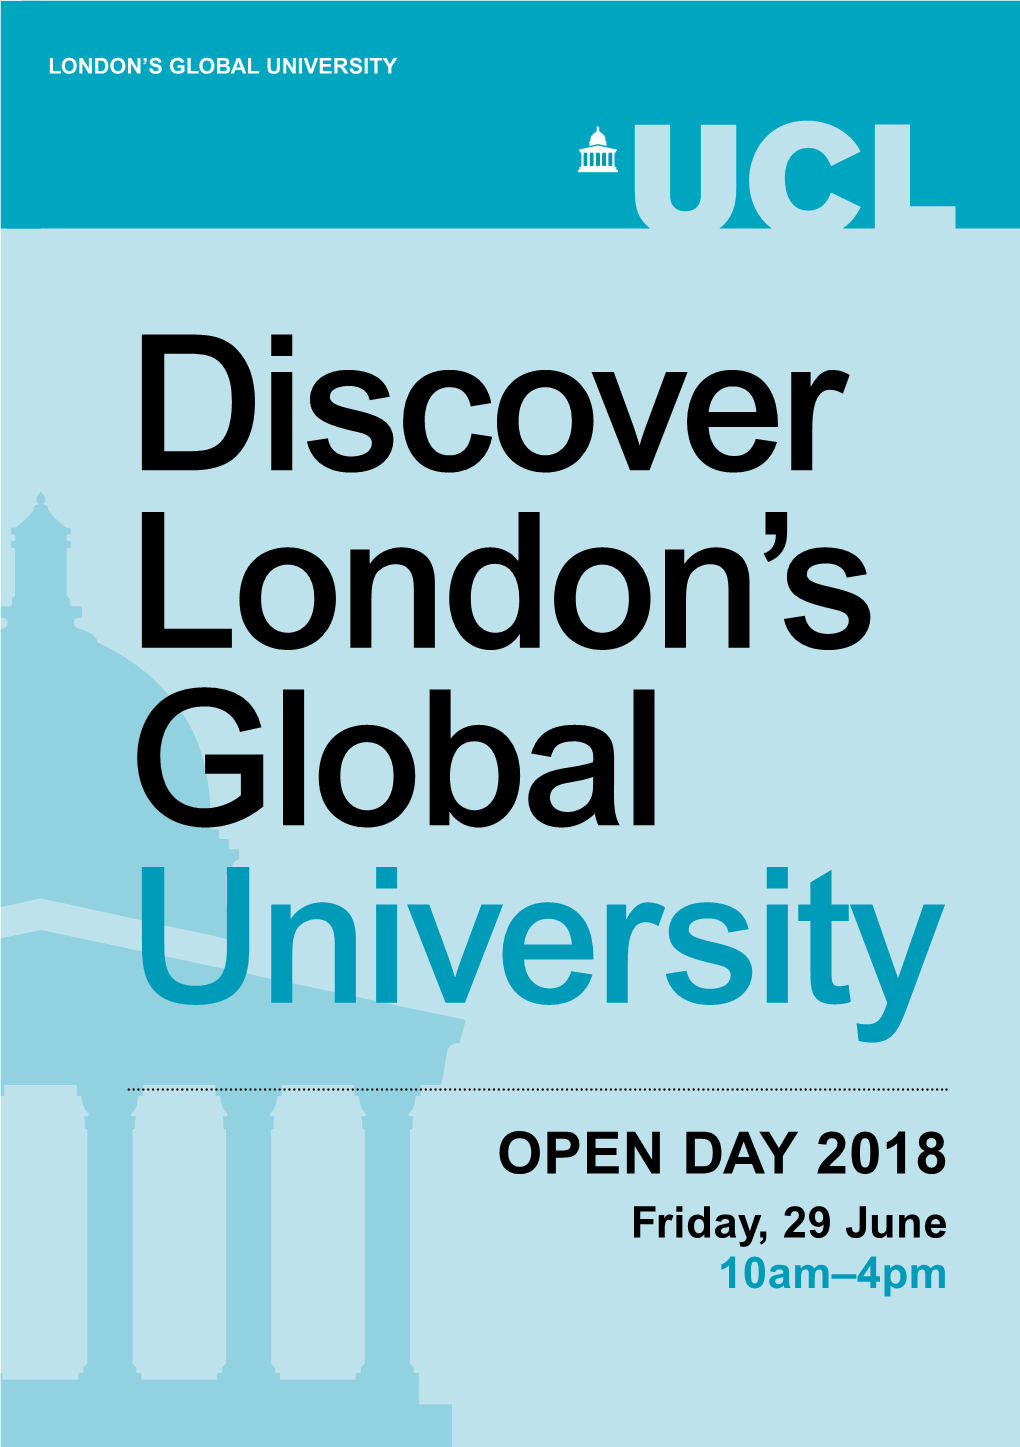 OPEN DAY 2018 Friday, 29 June 10Am–4Pm W E I Am Delighted That You Are Considering Studying at UCL and L Pleased to Welcome You on Campus C Today